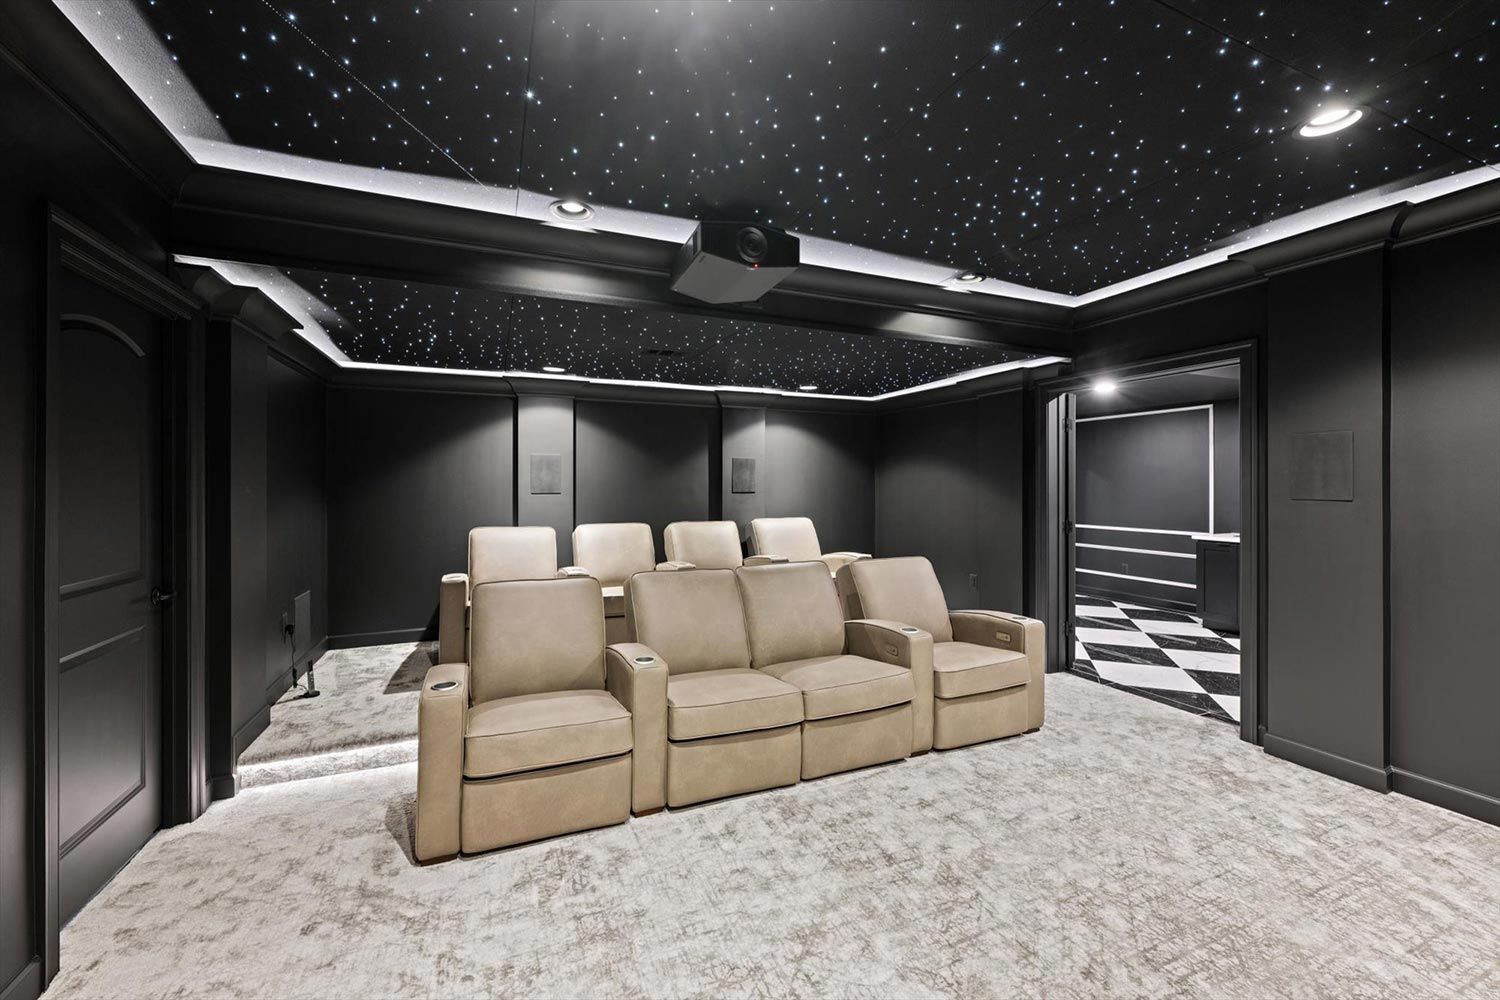 Luxurious home theater featuring plush reclining seats arranged in rows, all under a ceiling designed to look like a starry night sky with tiny LED lights.